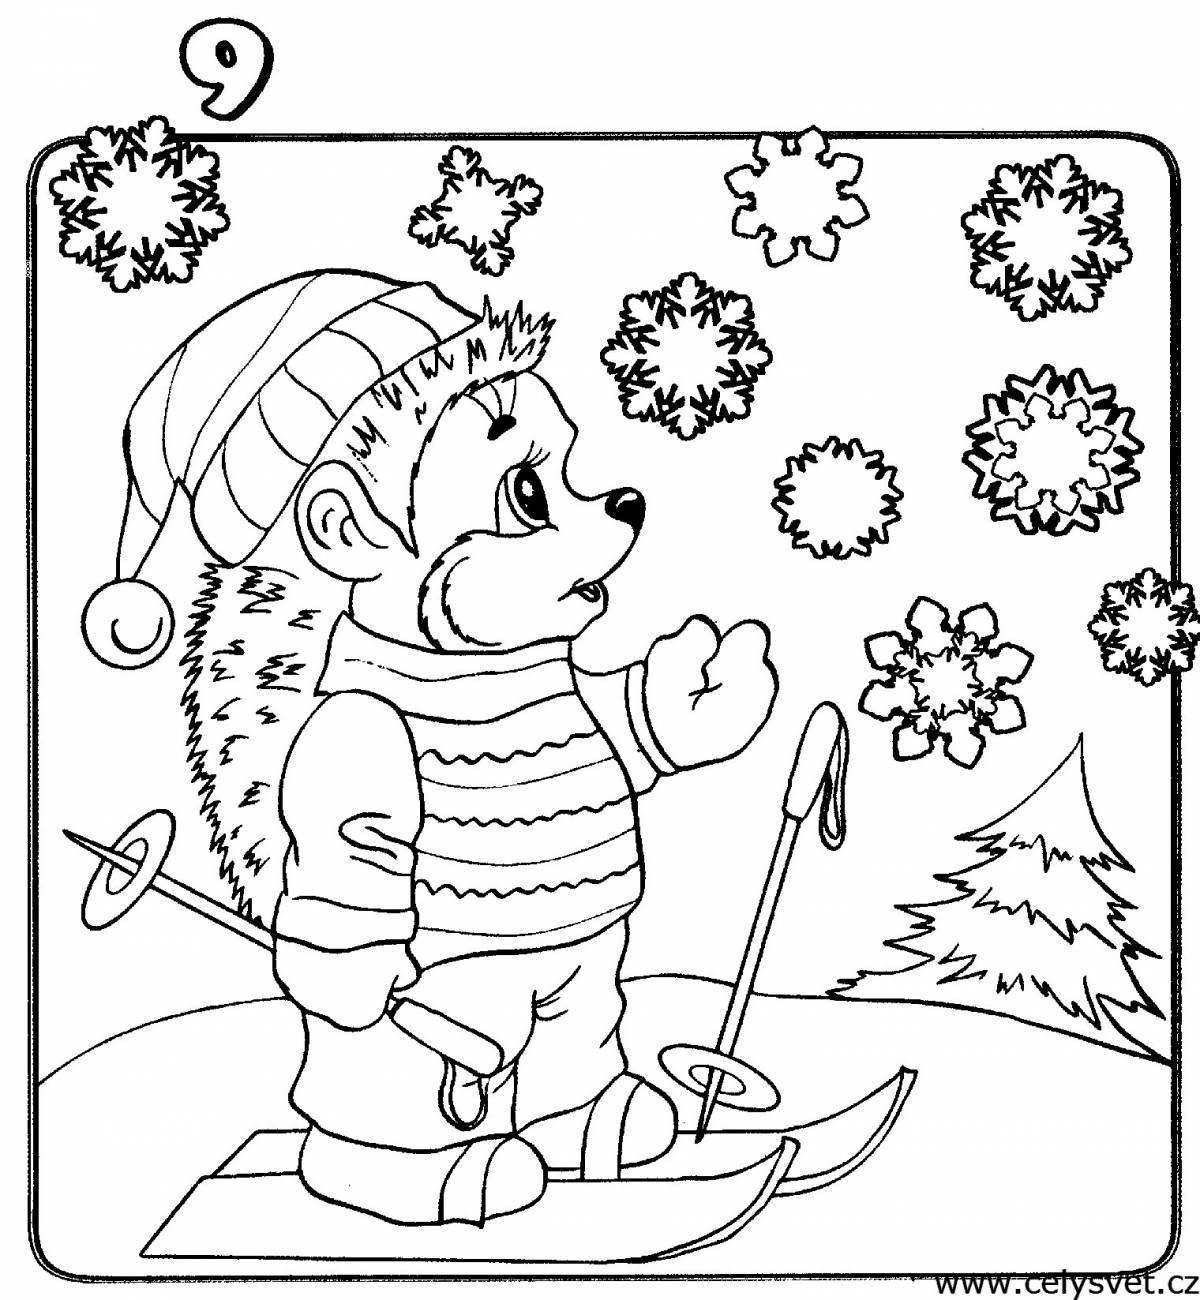 Charming coloring hedgehog new year